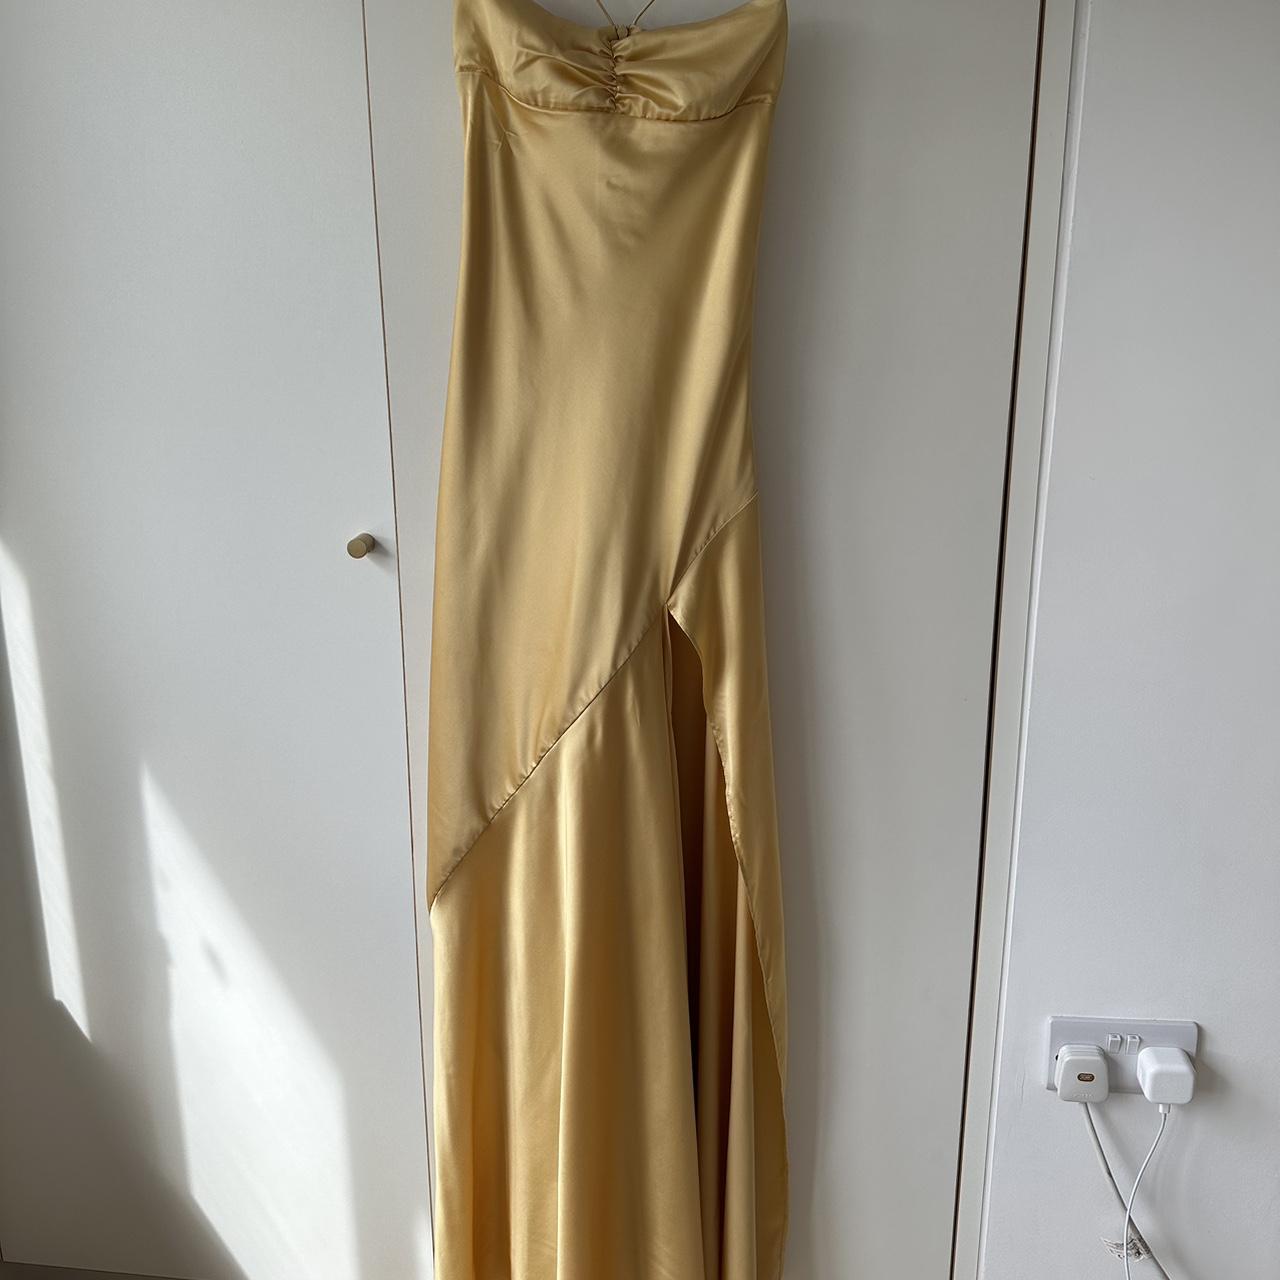 HNTR THE LABEL yellow gaia gown out of stock... - Depop